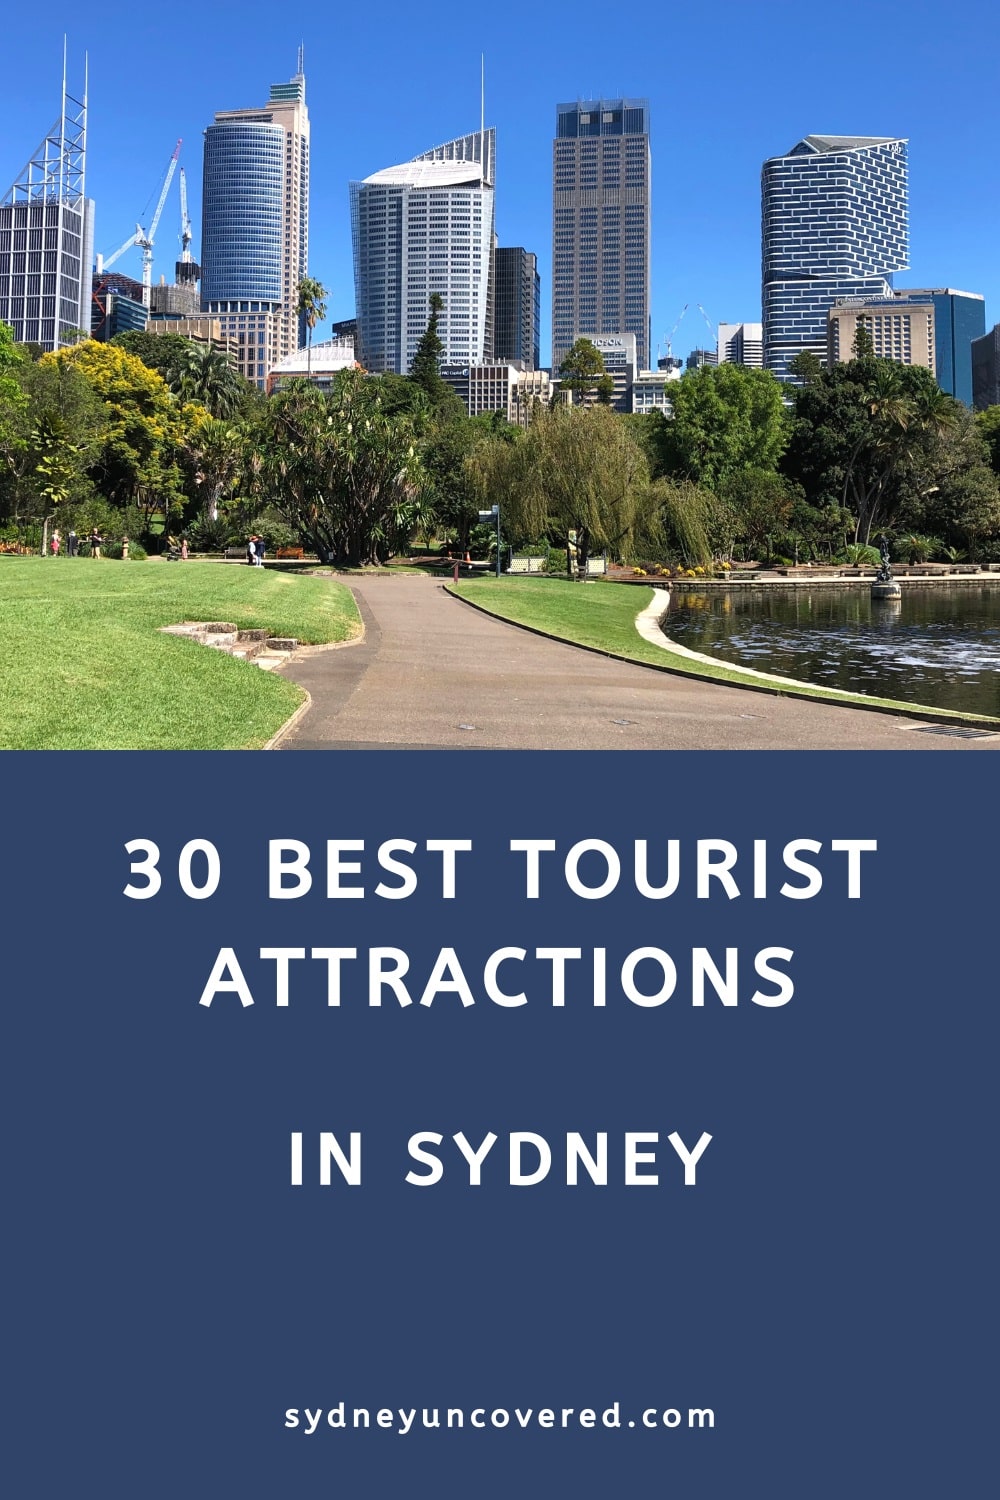 Top tourist attractions in Sydney